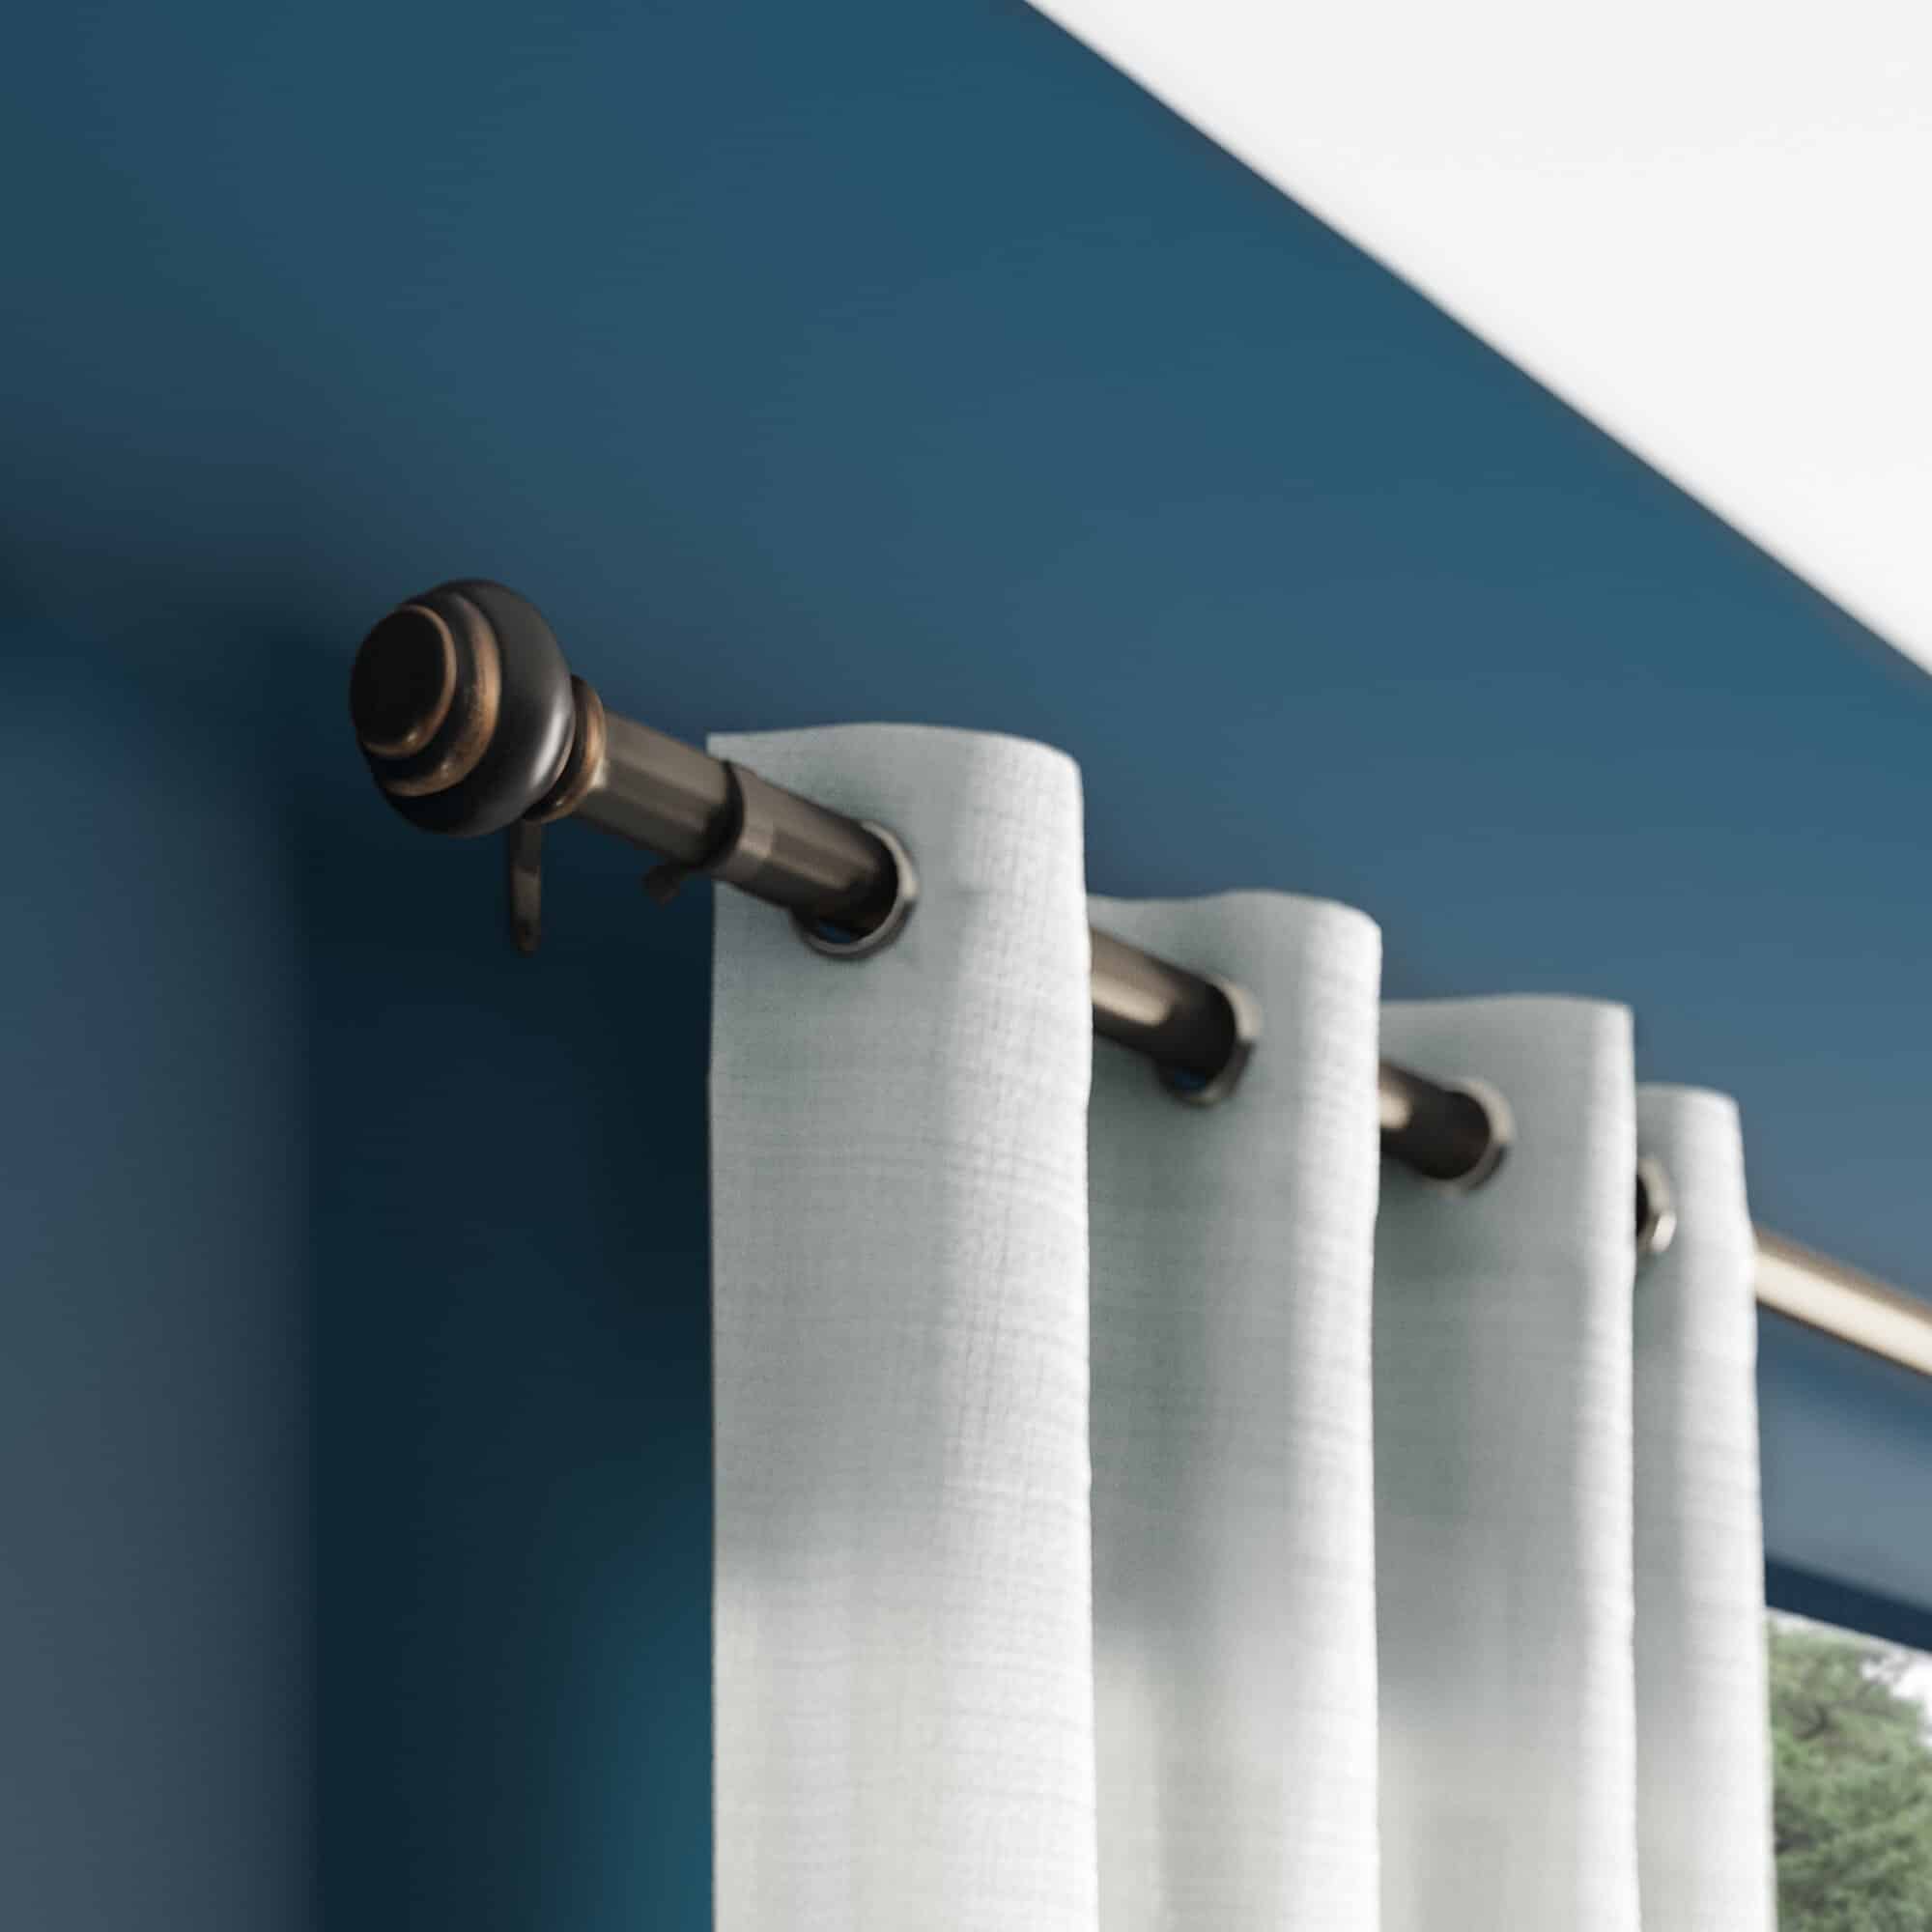 Make Curtain Rods Out of Electrical Conduit